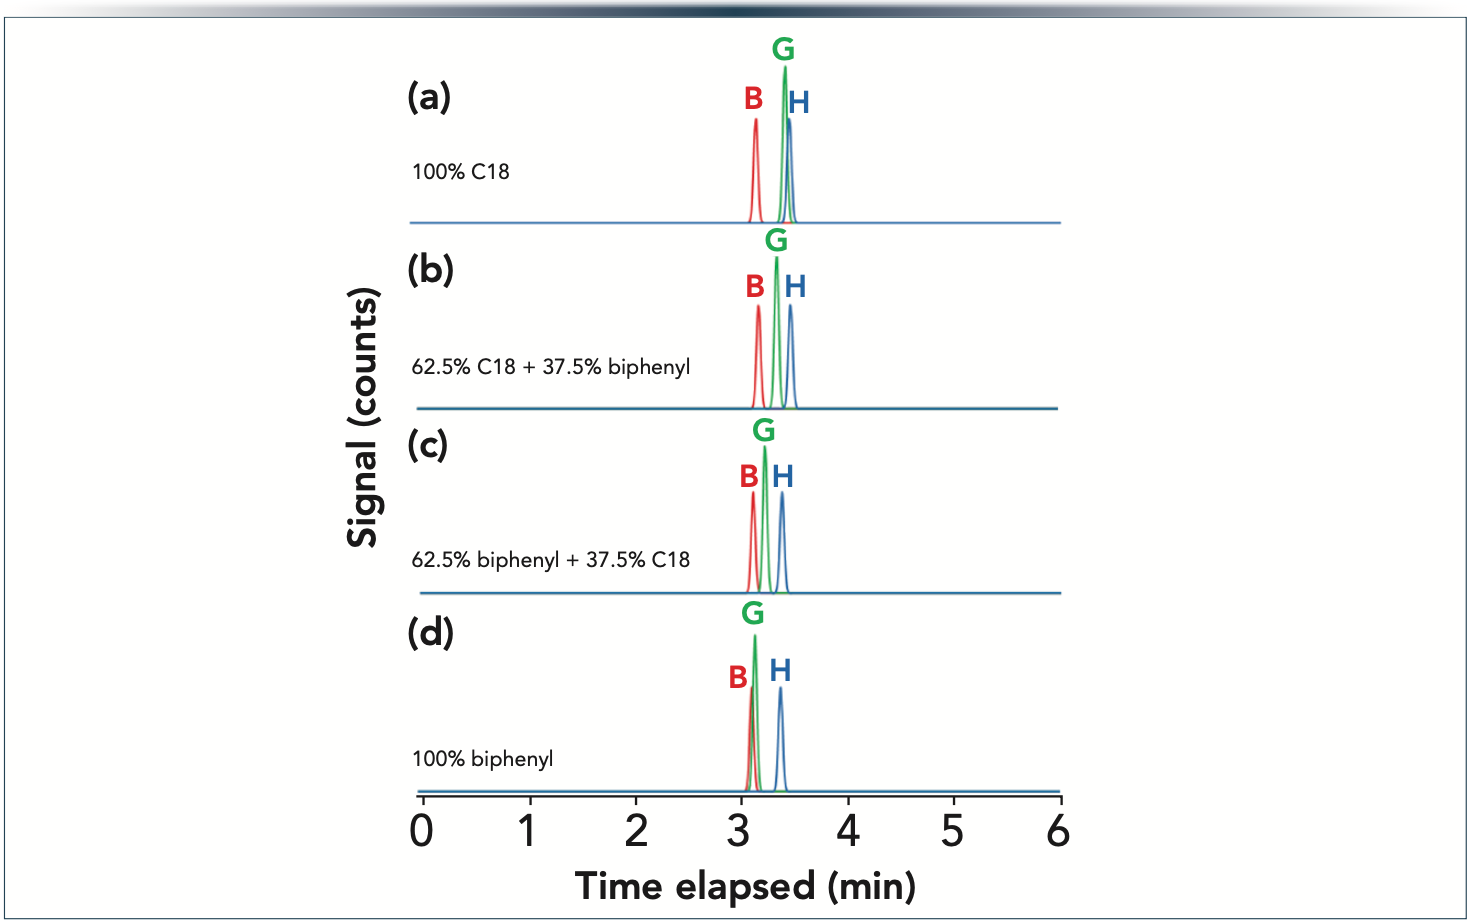 Figure 4: Predicted chromatograms for Imp-B, Imp-G, and Imp-H (as being the critical peak pairs) when coupling 5 cm and 3 cm long columns packed with SP C18 and SP biphenyl phases. Gradient 30–70%B in 6 min at F = 0.4 mL/min. Columns: (a) 8 cm SP C18 (5 cm + 3cm),(b) 5 cm SPC 18 + 3 cm SP biphenyl, (c) 5 cm SP biphenyl + 3 cm SP C18, and (d) 8 cm SP biphenyl (5 cm + 3 cm). The system’s gradient delay time is considered.